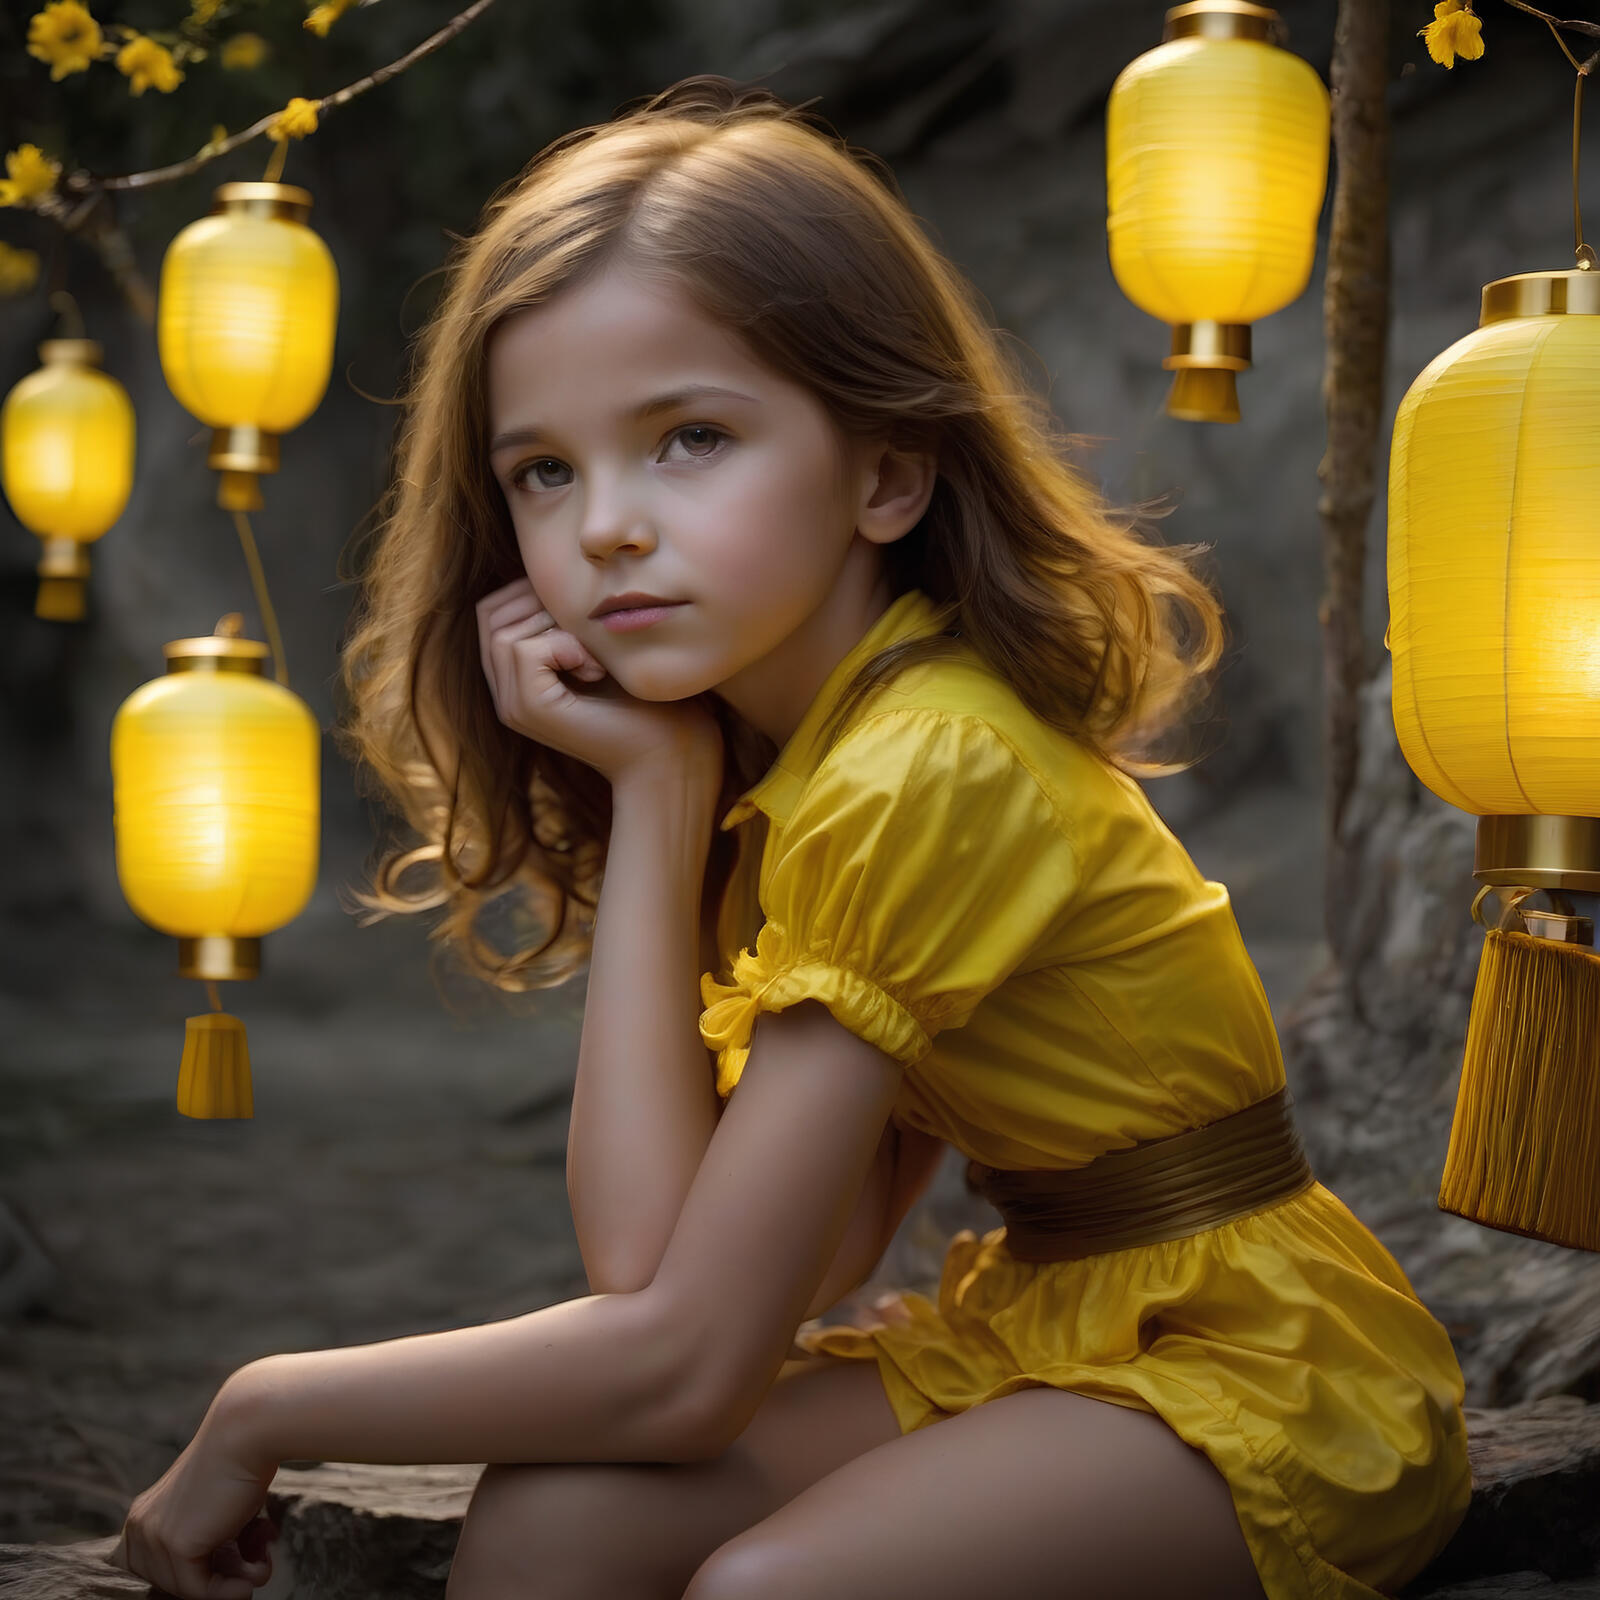 Free photo The girl and the yellow lanterns